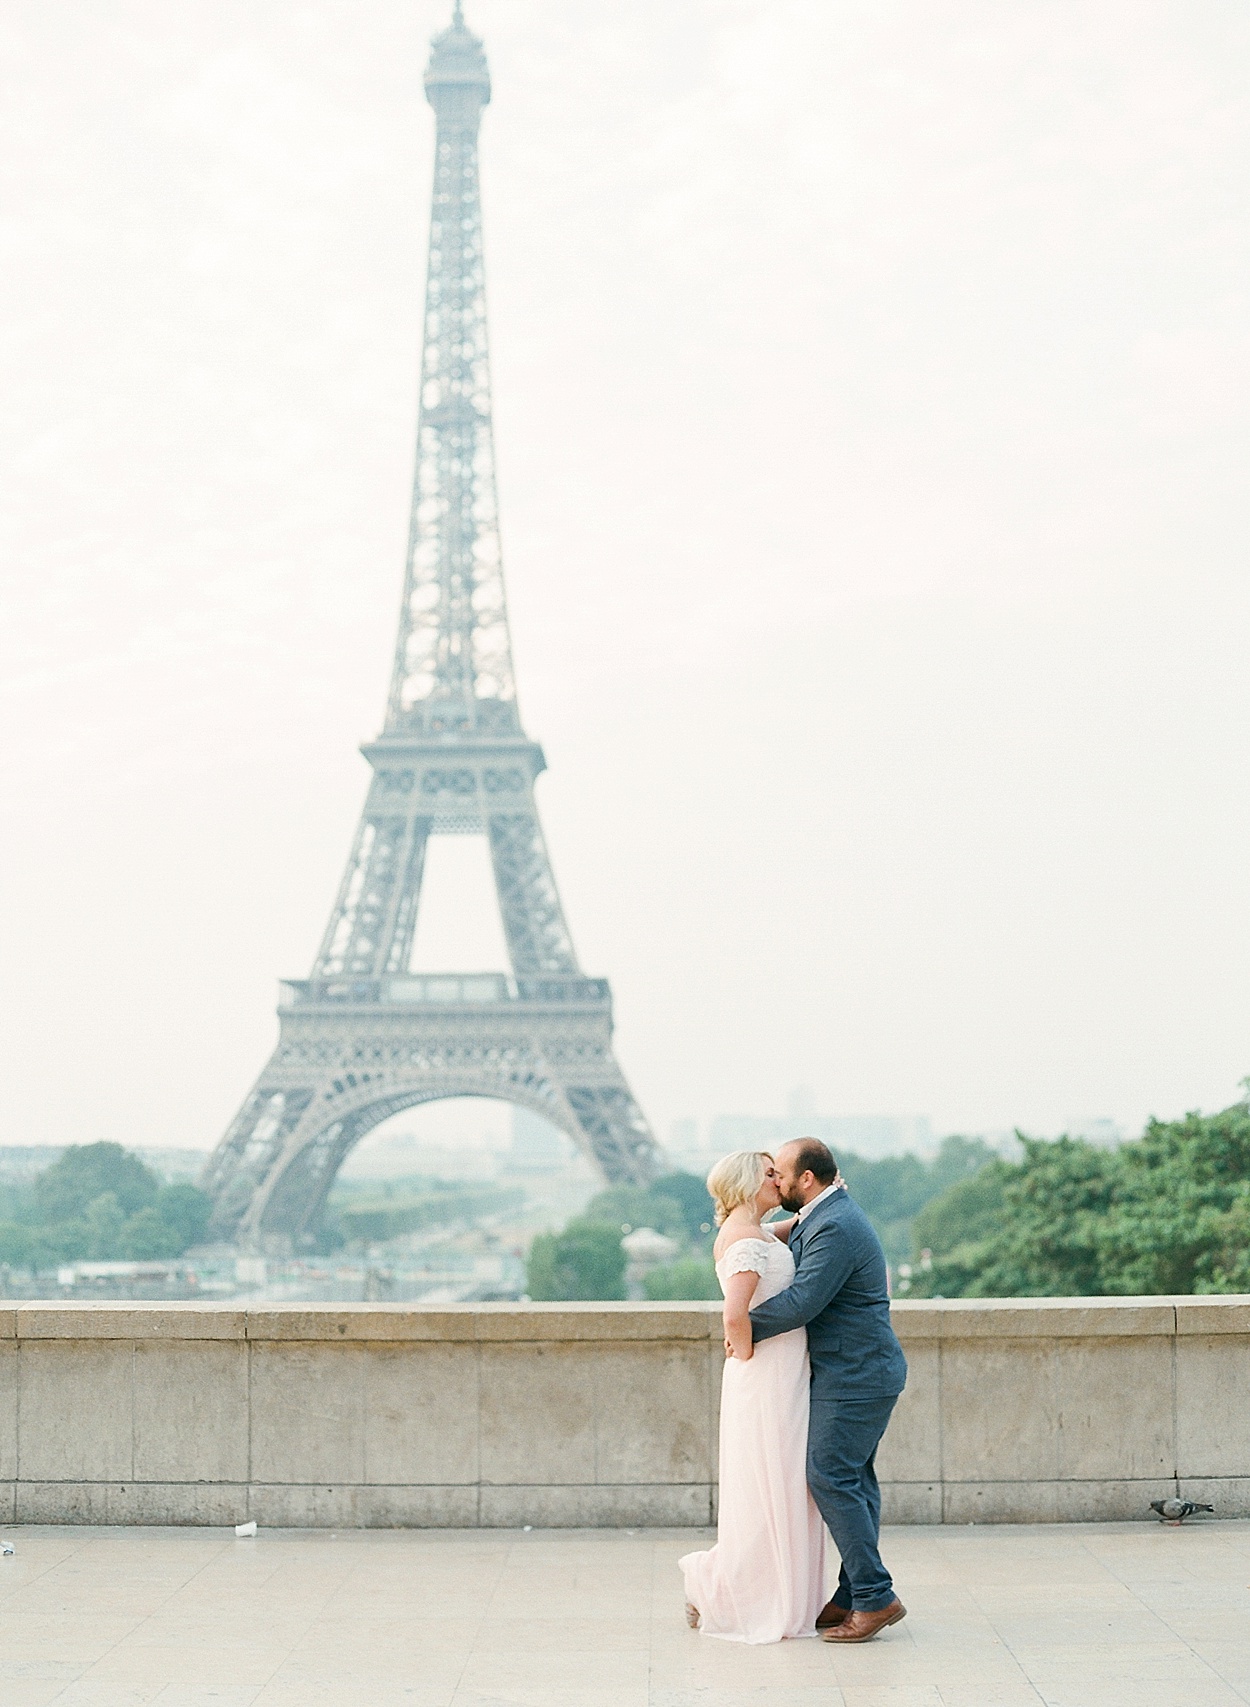 Paris anniversary photos at the Eiffel Tower | by Abby Grace